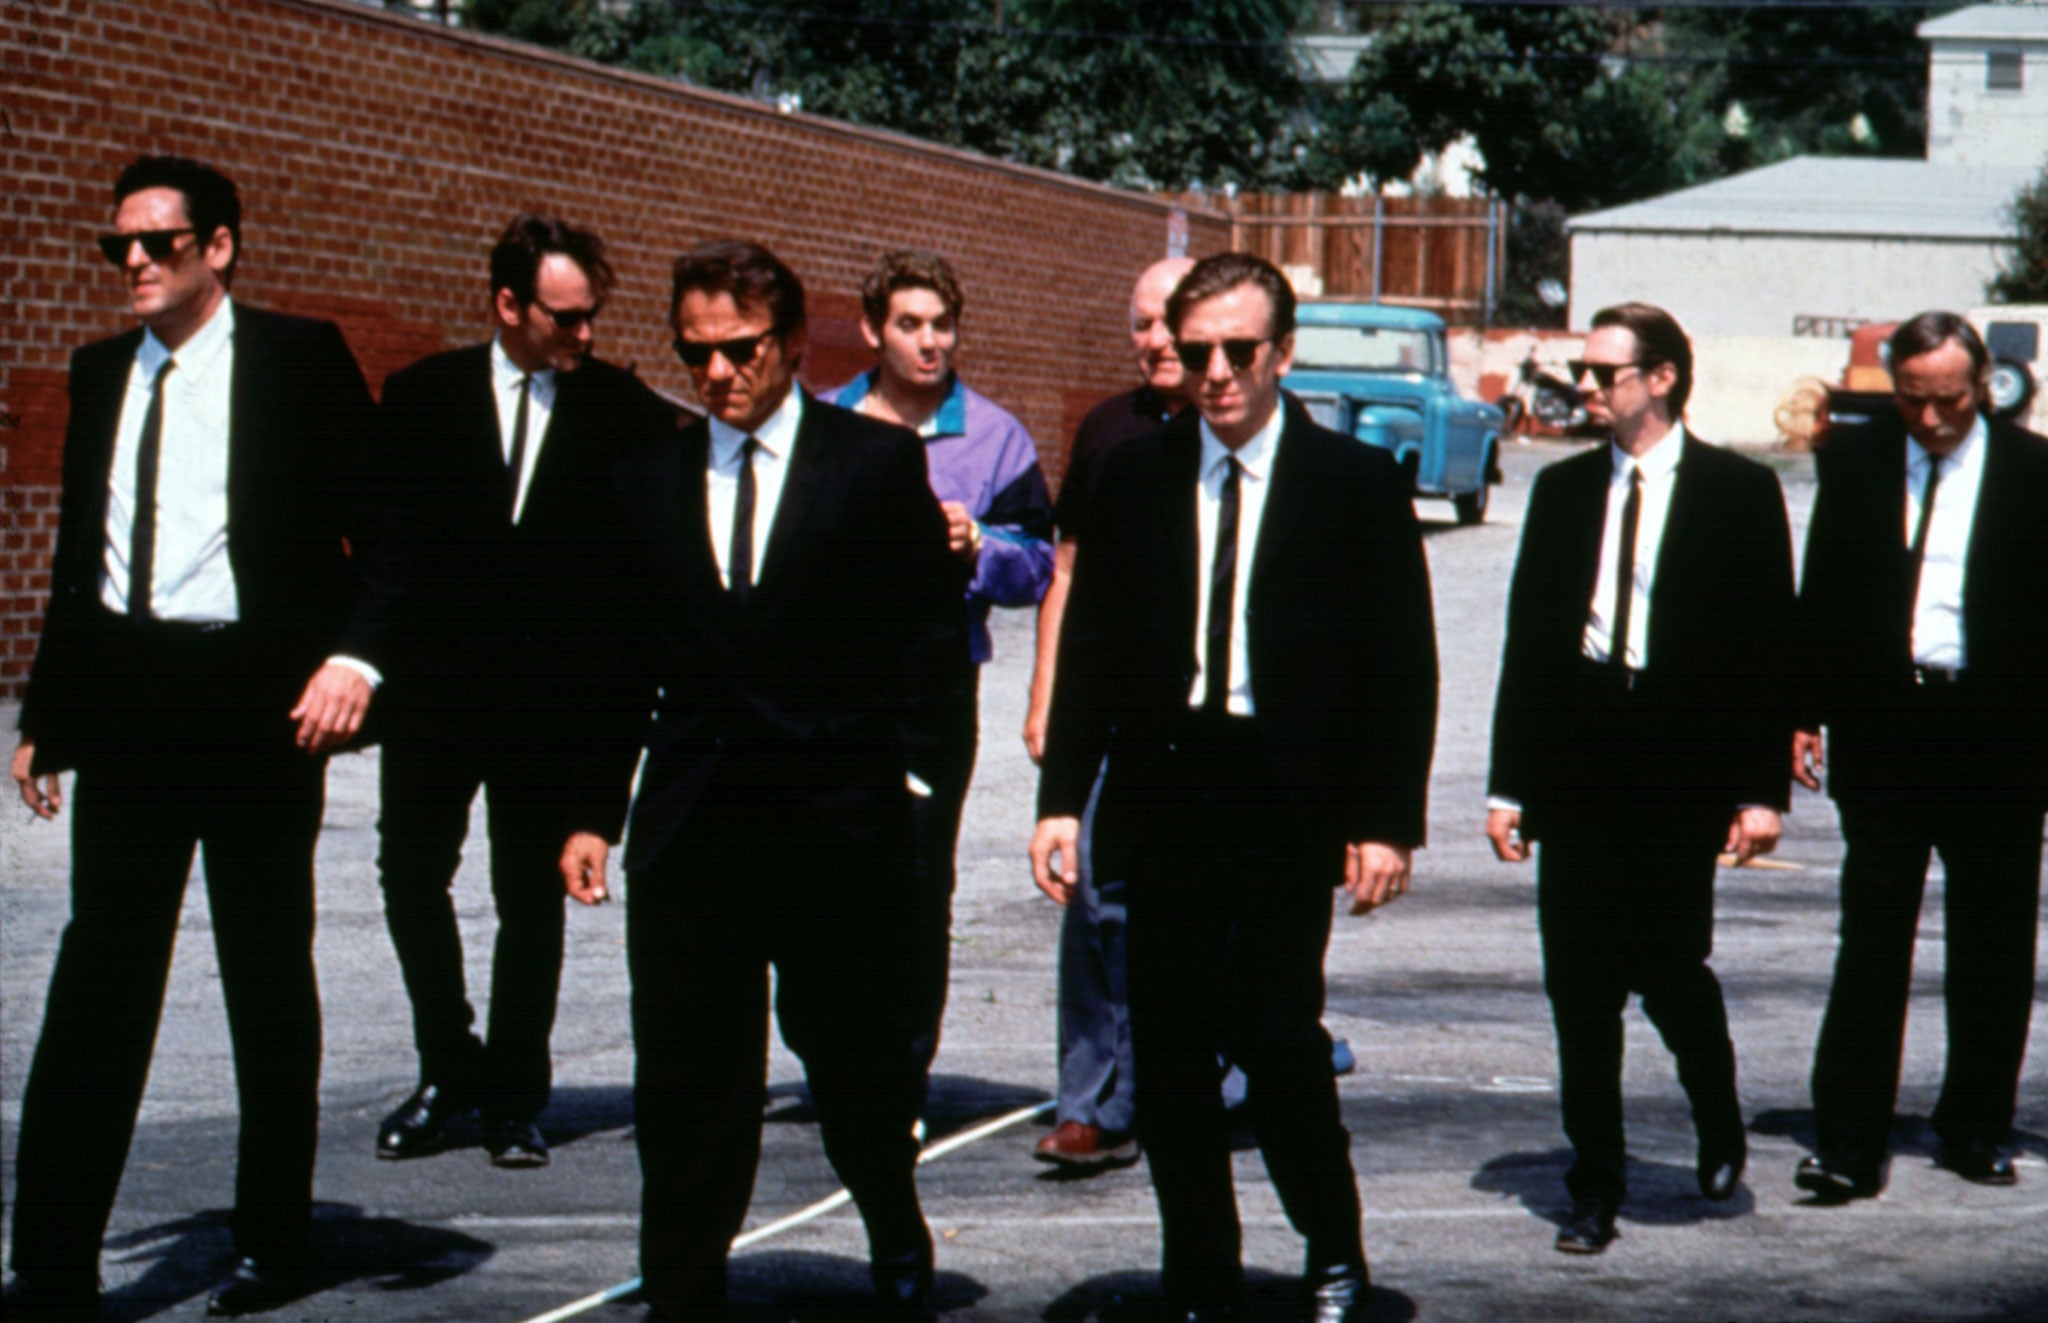 Outlaw chic: Tierney, Keitel, Buscemi, Roth, Madsen, and Tarantino in Reservoir Dogs